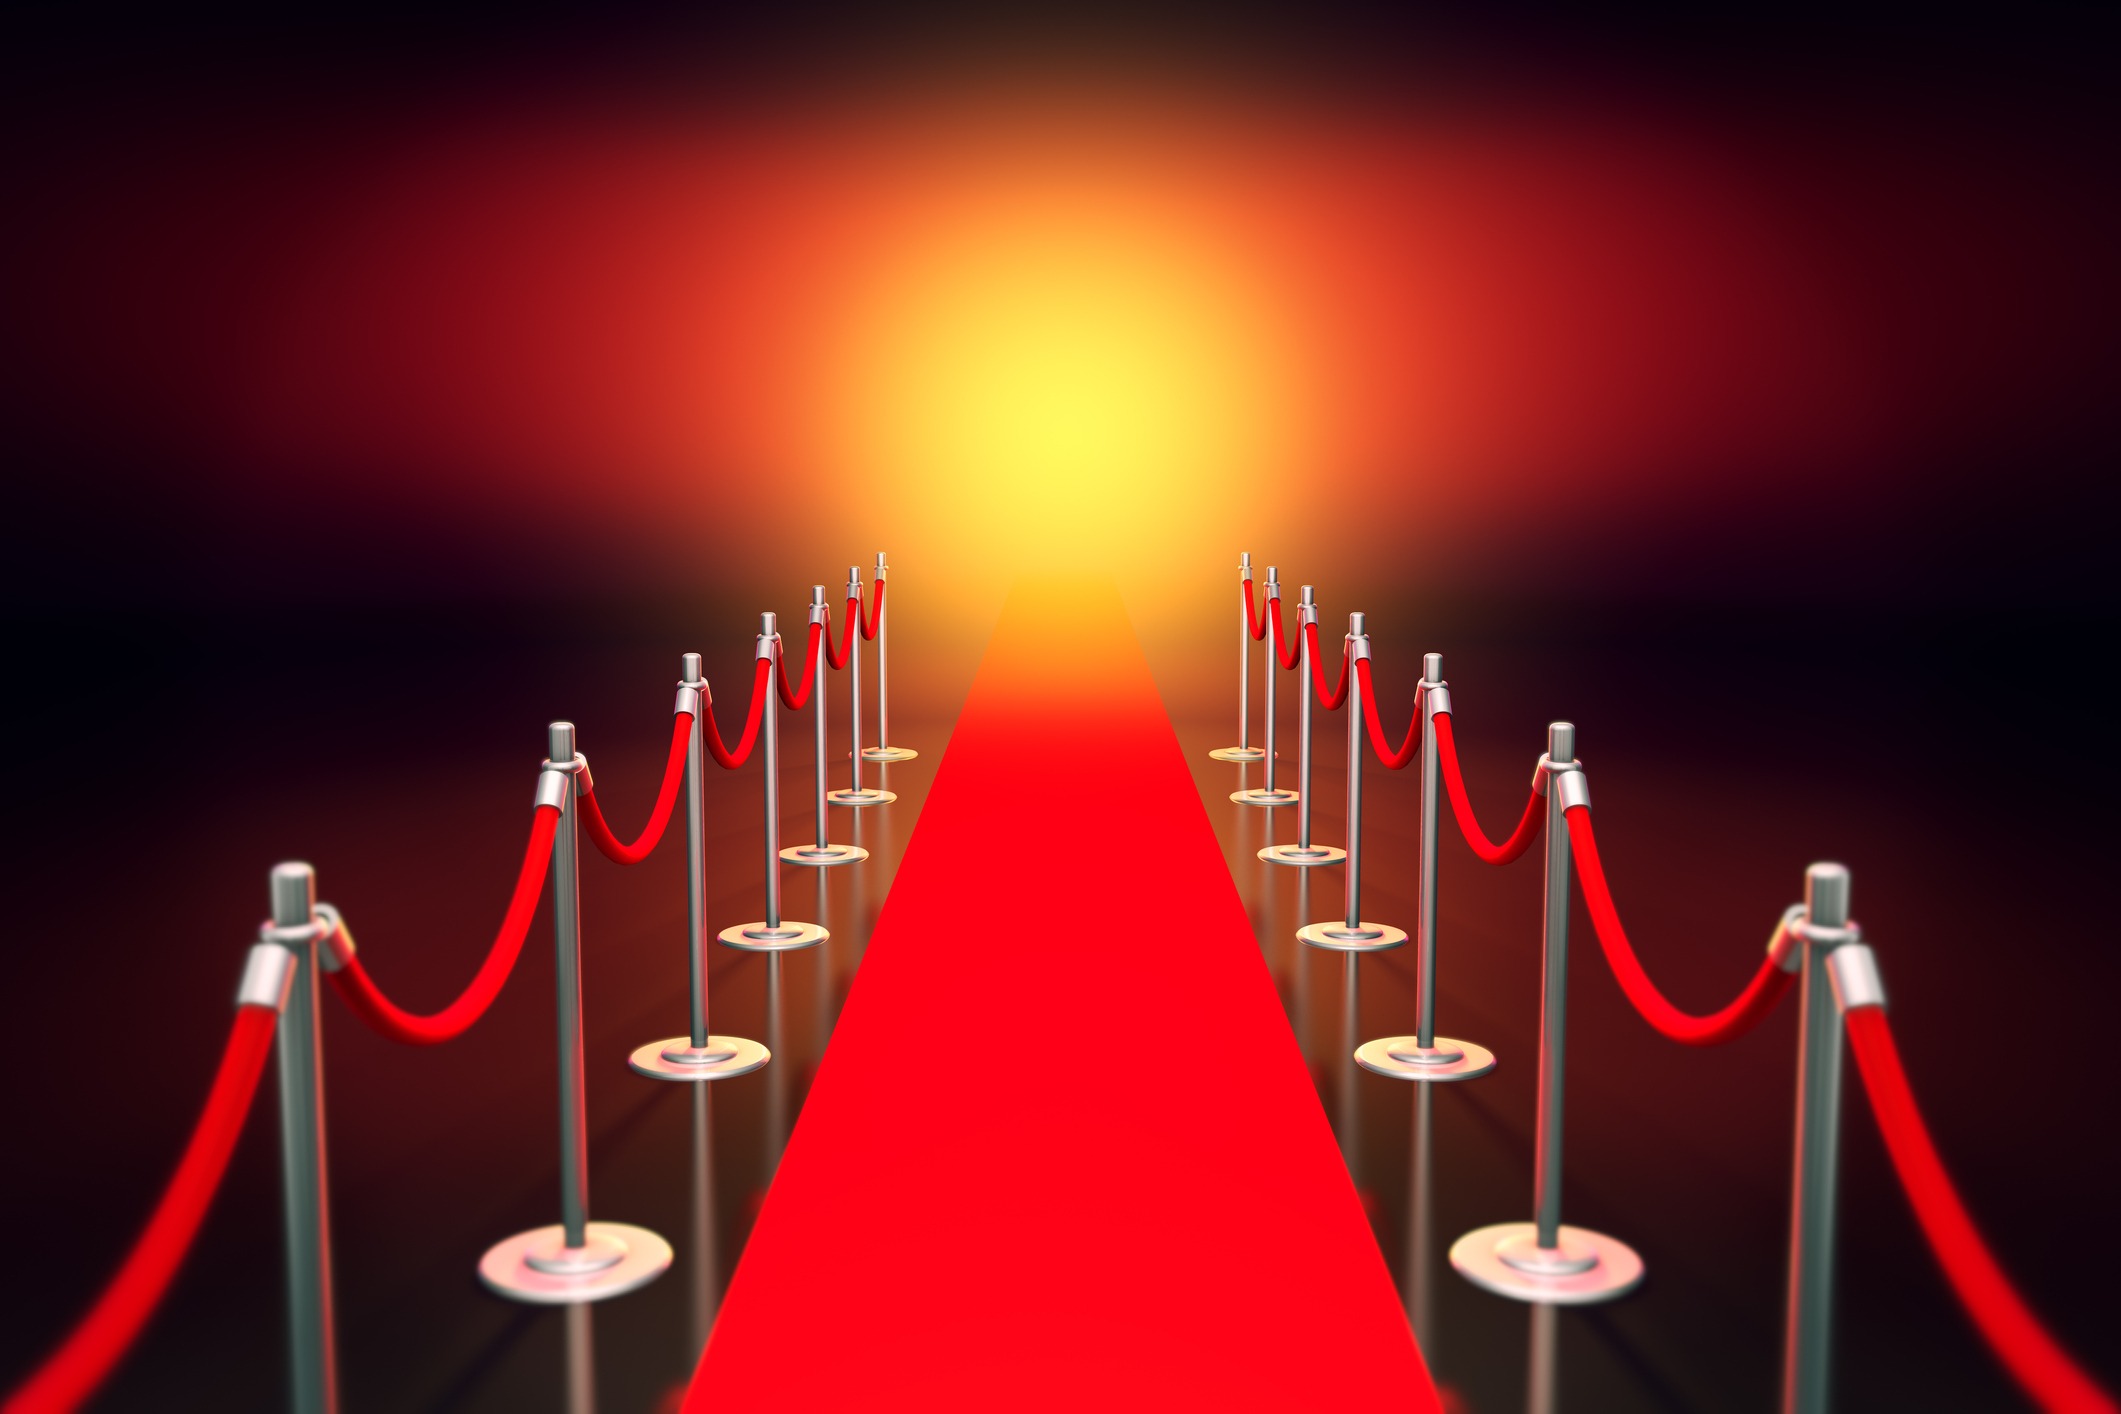 A CGI image of a red carpet with ropes on either side,